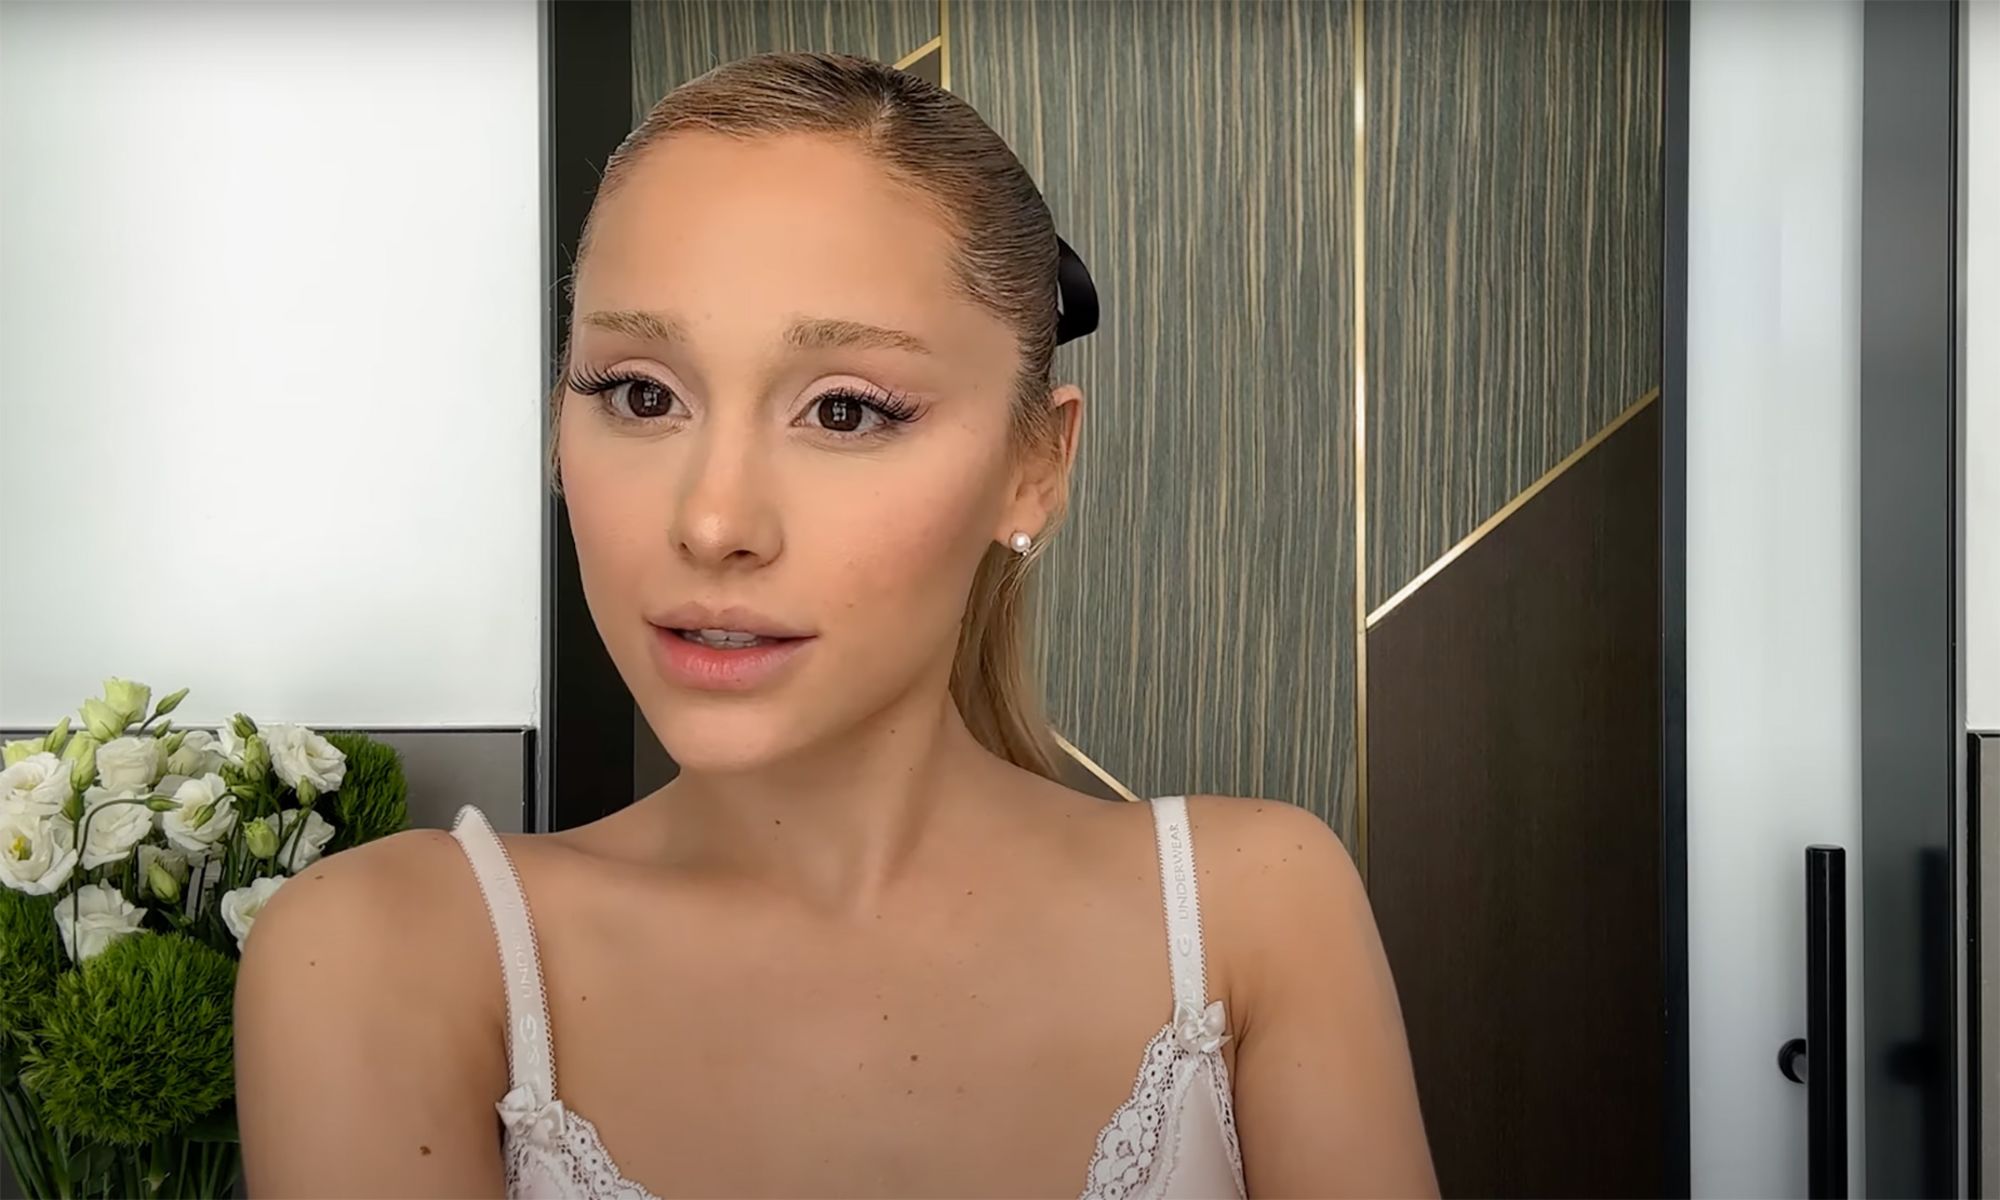 Ariana Grande's terrified face is turned into a series of